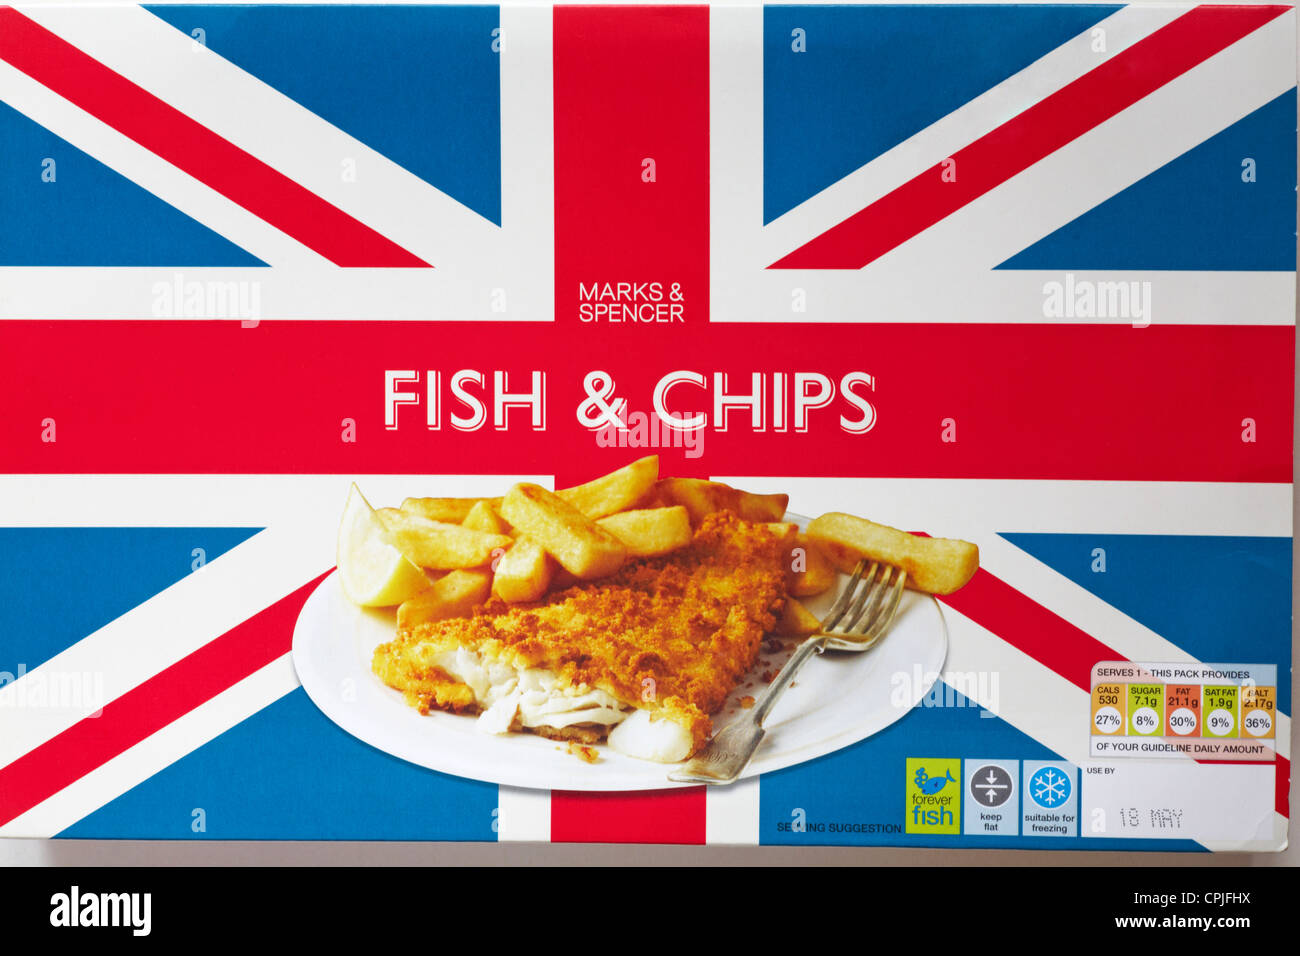 pack of Marks & Spencer Fish & Chips with Union Jack on box Stock Photo